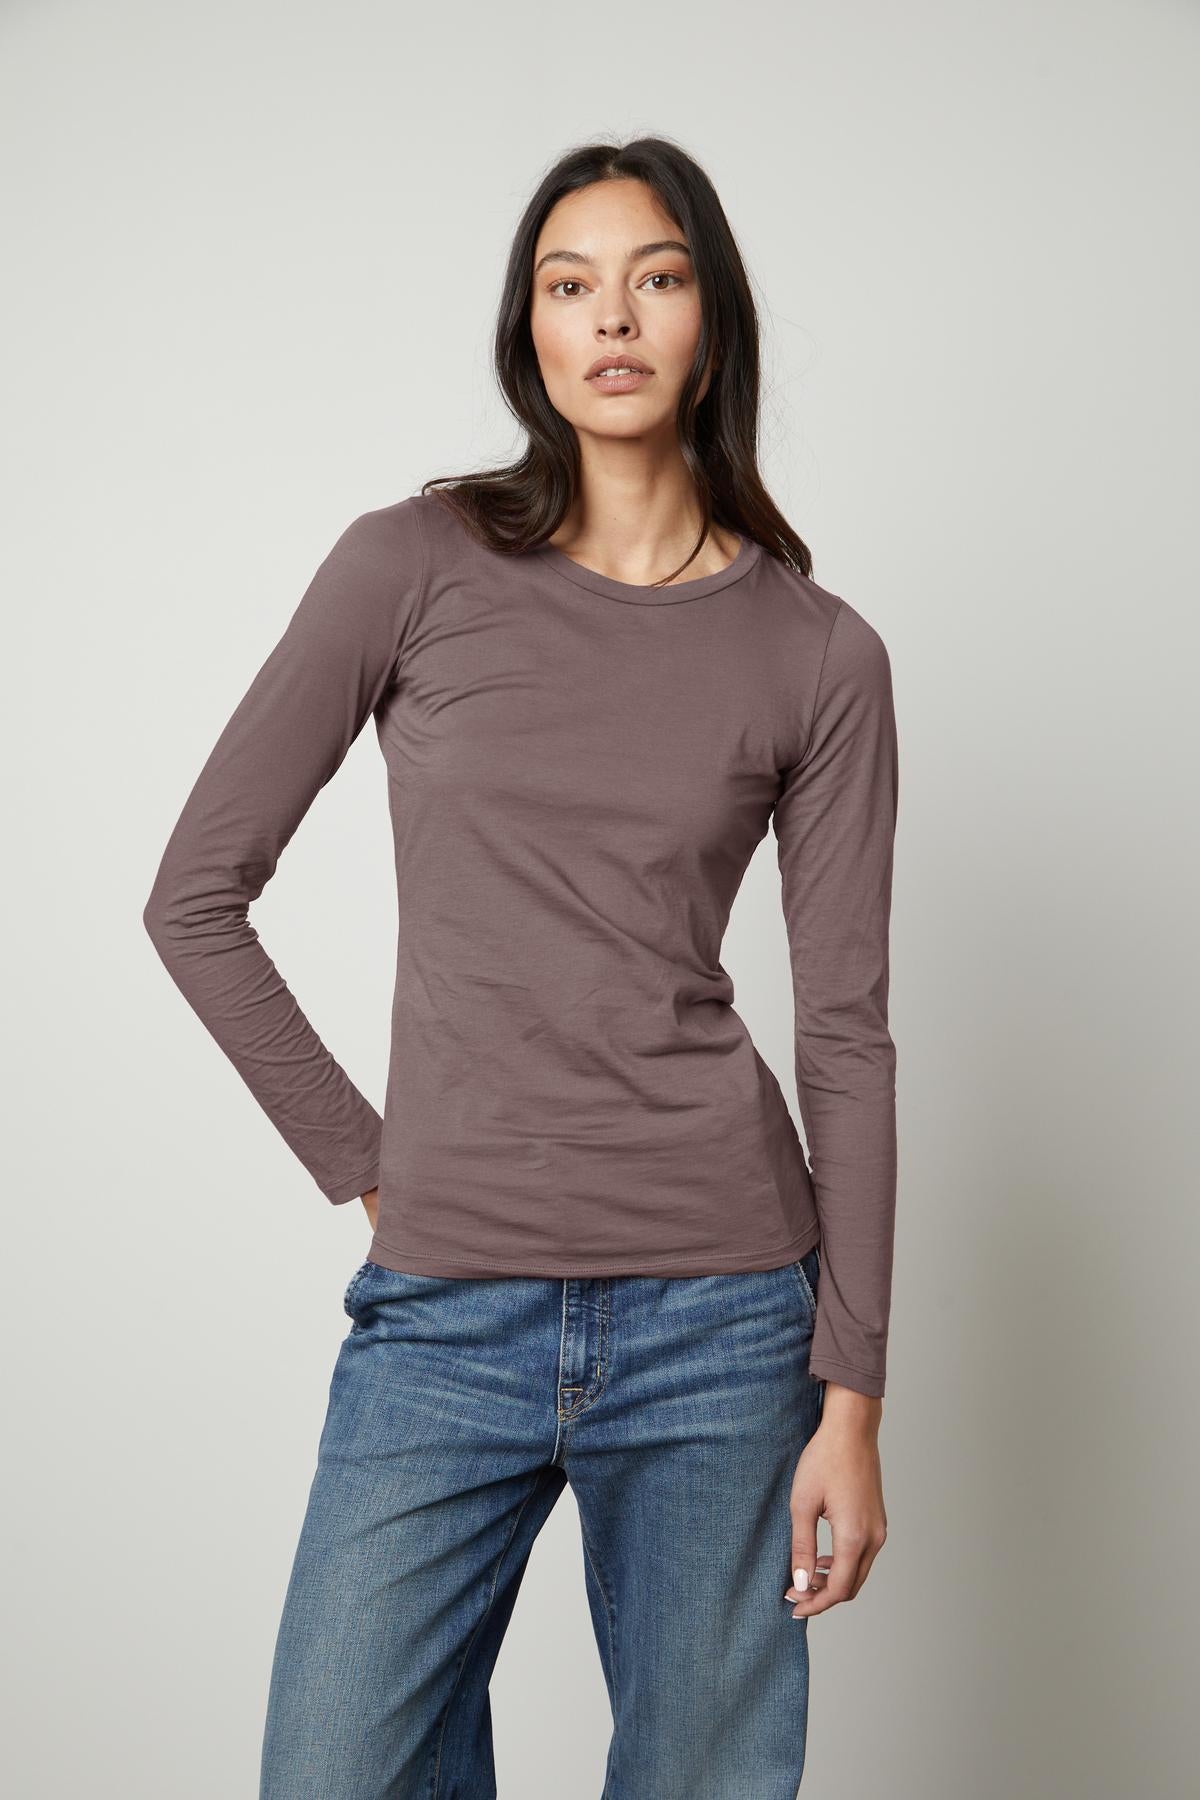   The ZOFINA GAUZY WHISPER FITTED CREW NECK TEE in a dark brown color is made of soft cotton by Velvet by Graham & Spencer. 